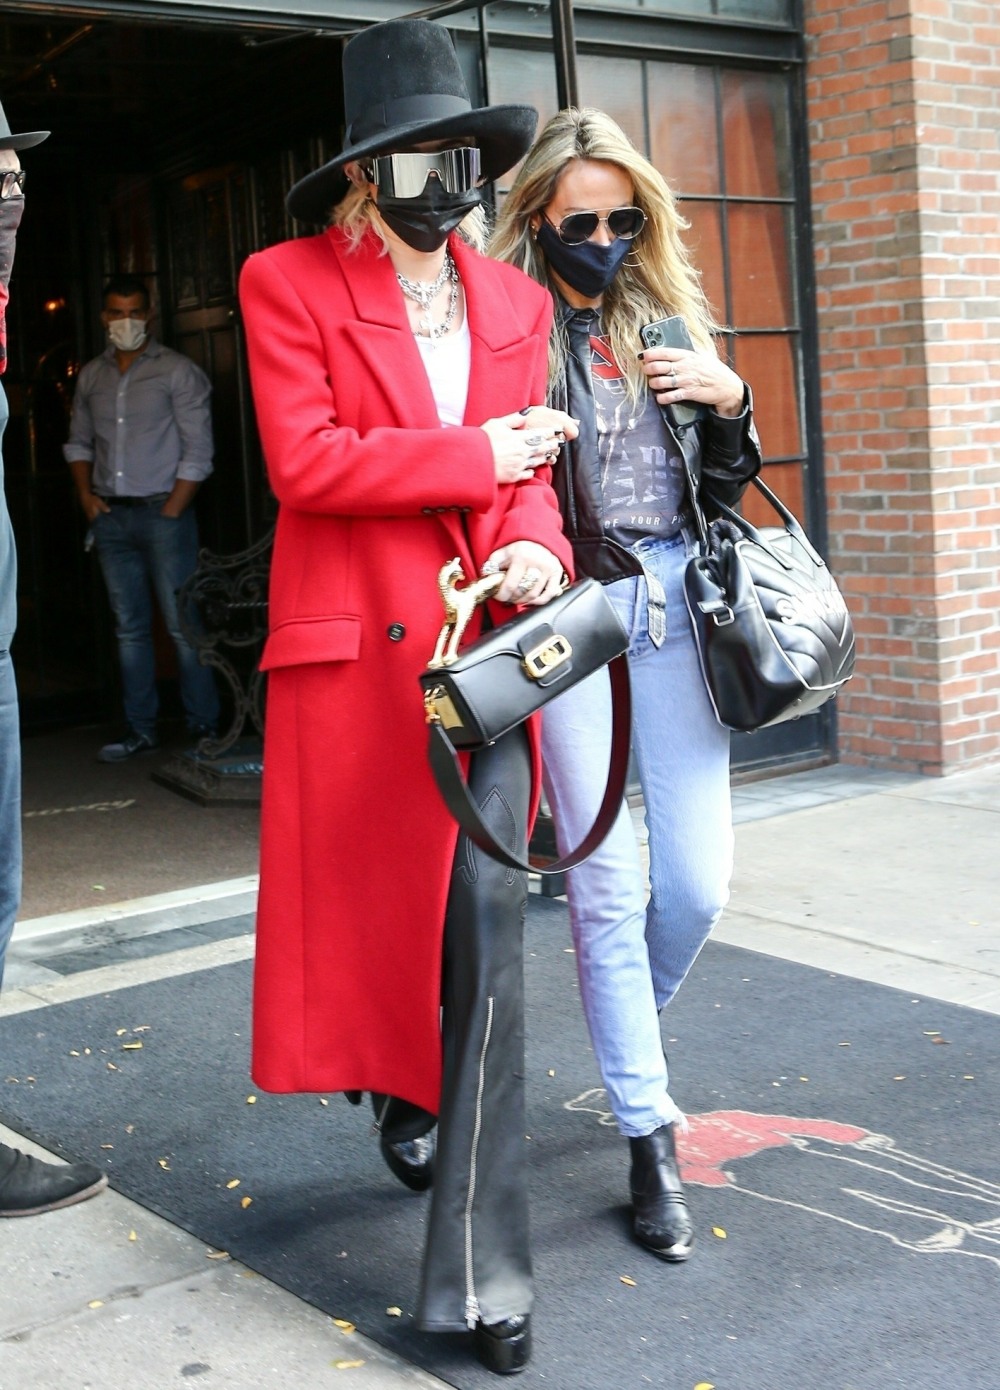 Miley Cyrus rocks a red trench coat as she steps out of her hotel